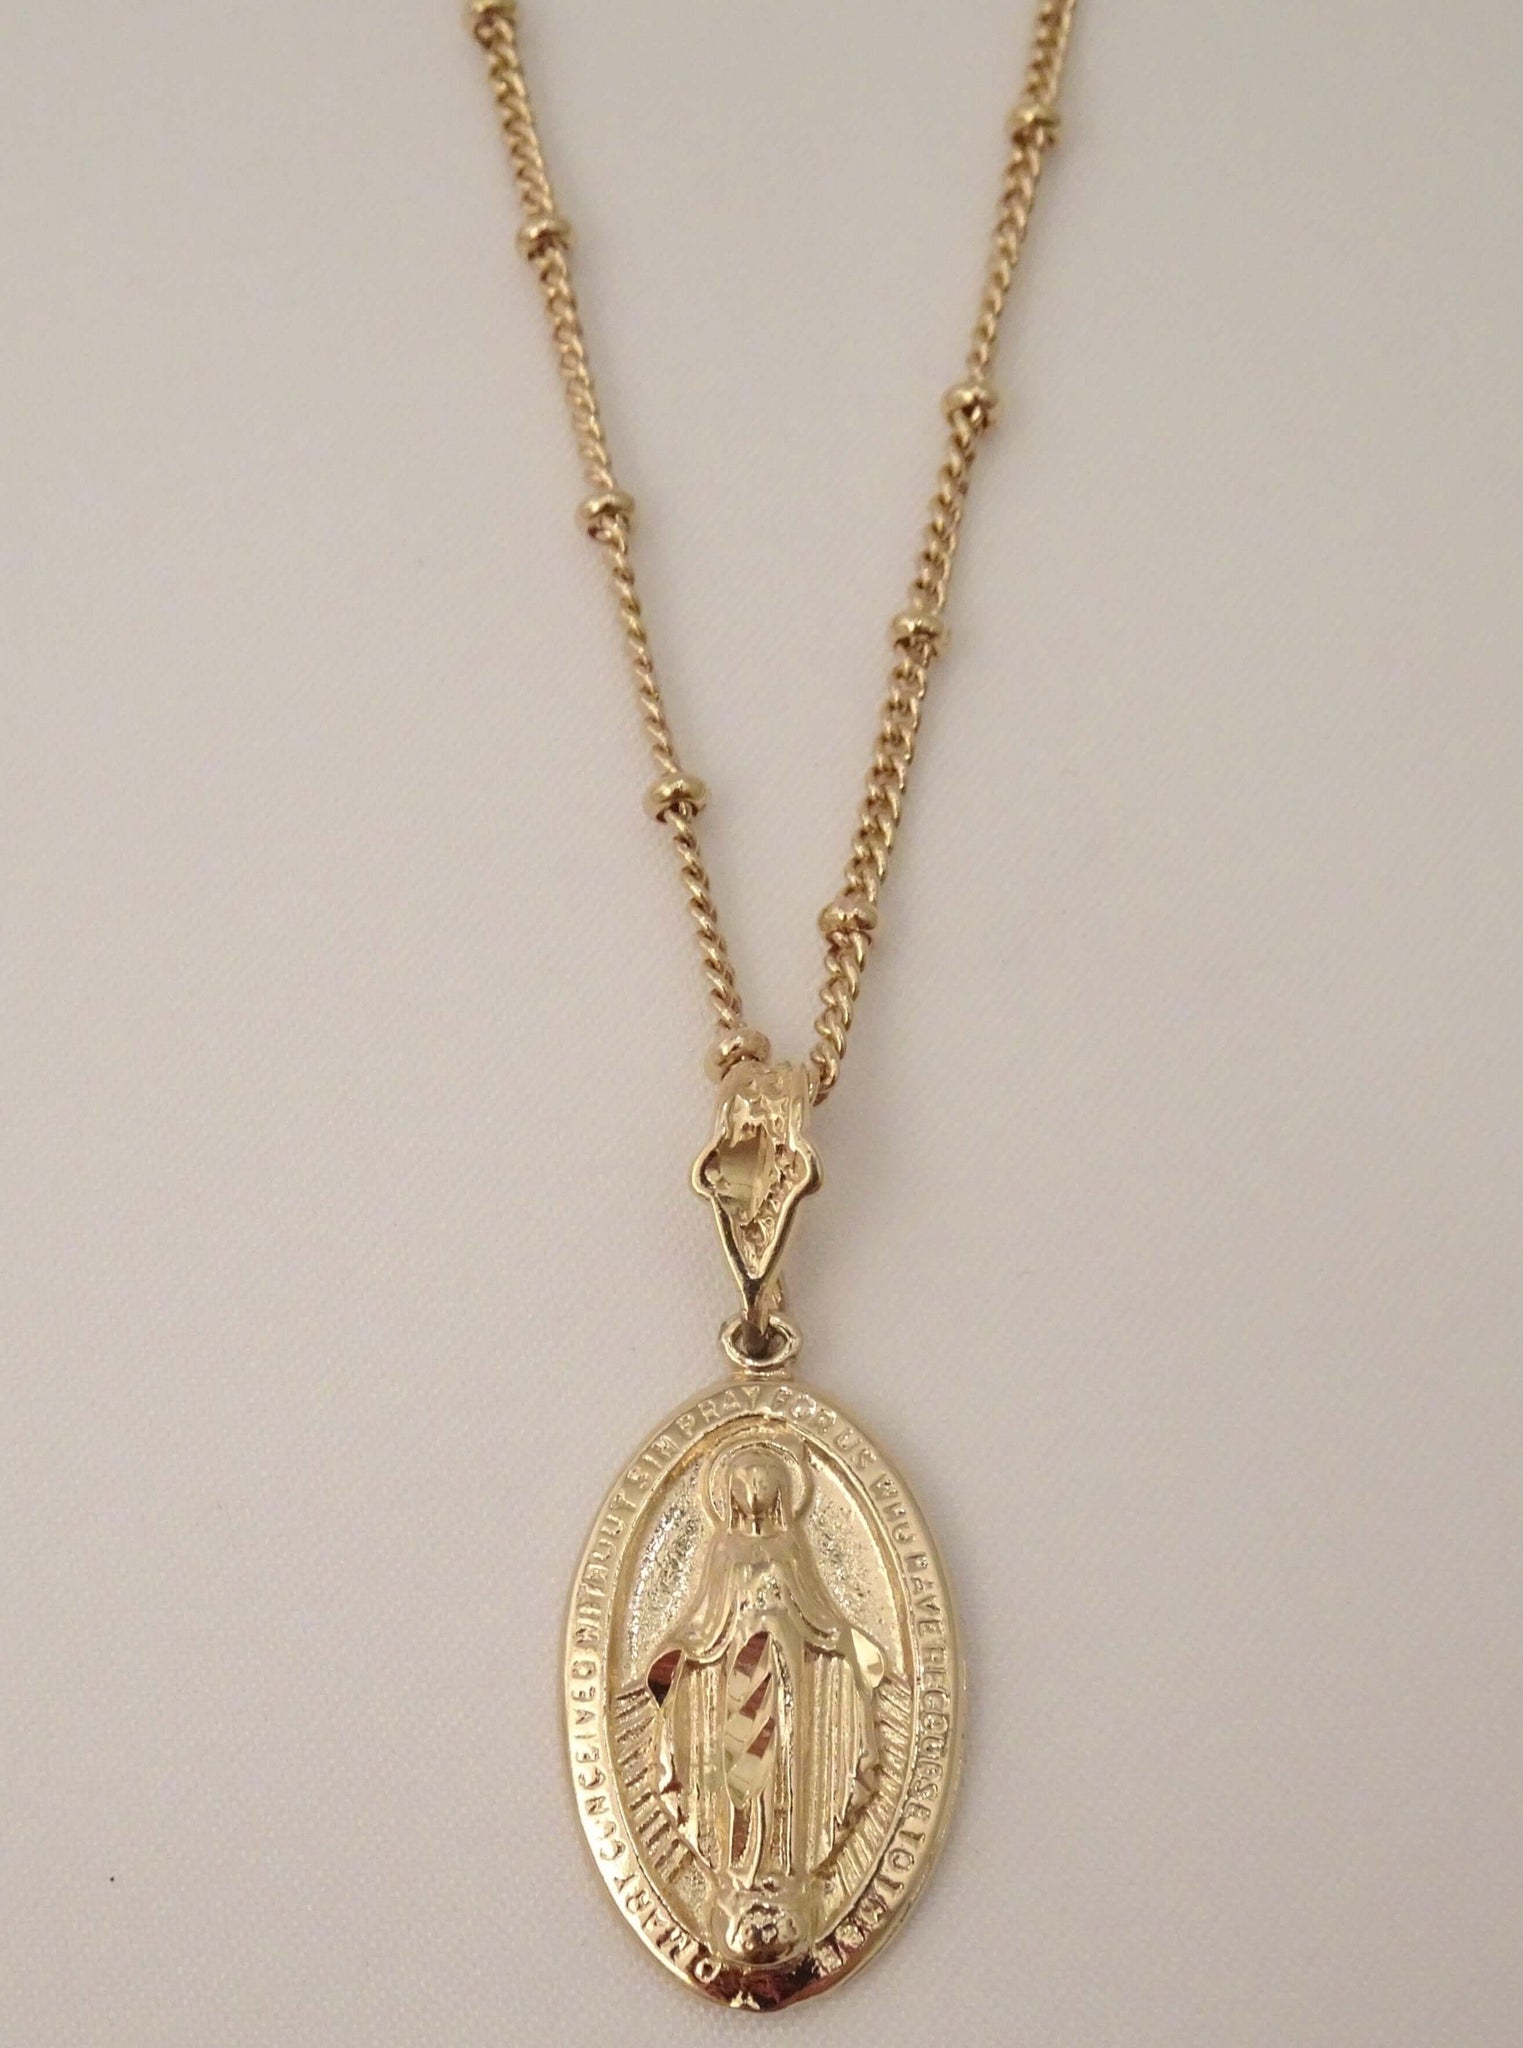 Mother Mary Necklace - Round Pendant Necklace In Gold